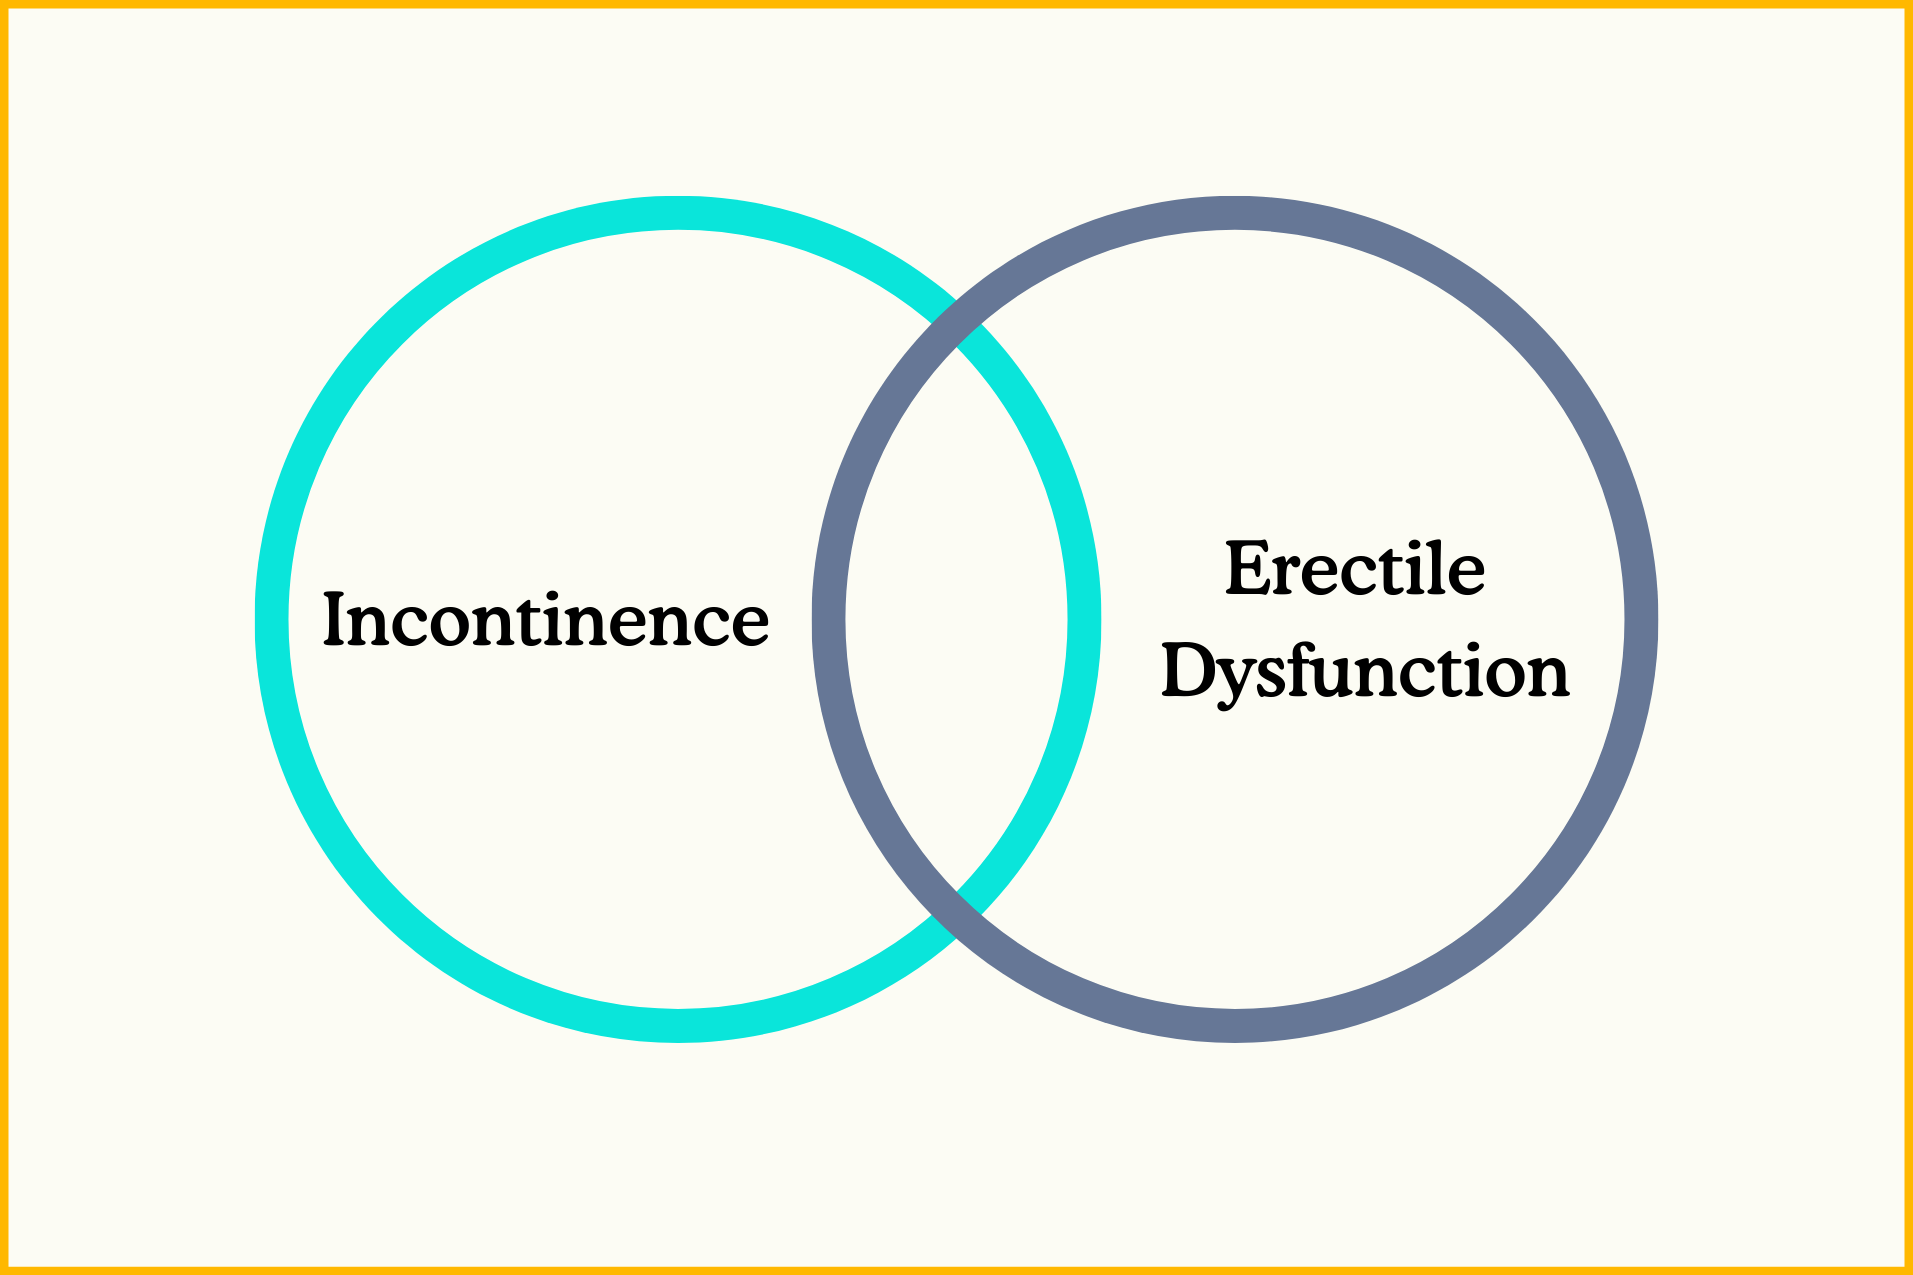 A graphic with "incontinence" and "erectile dysfunction" written.